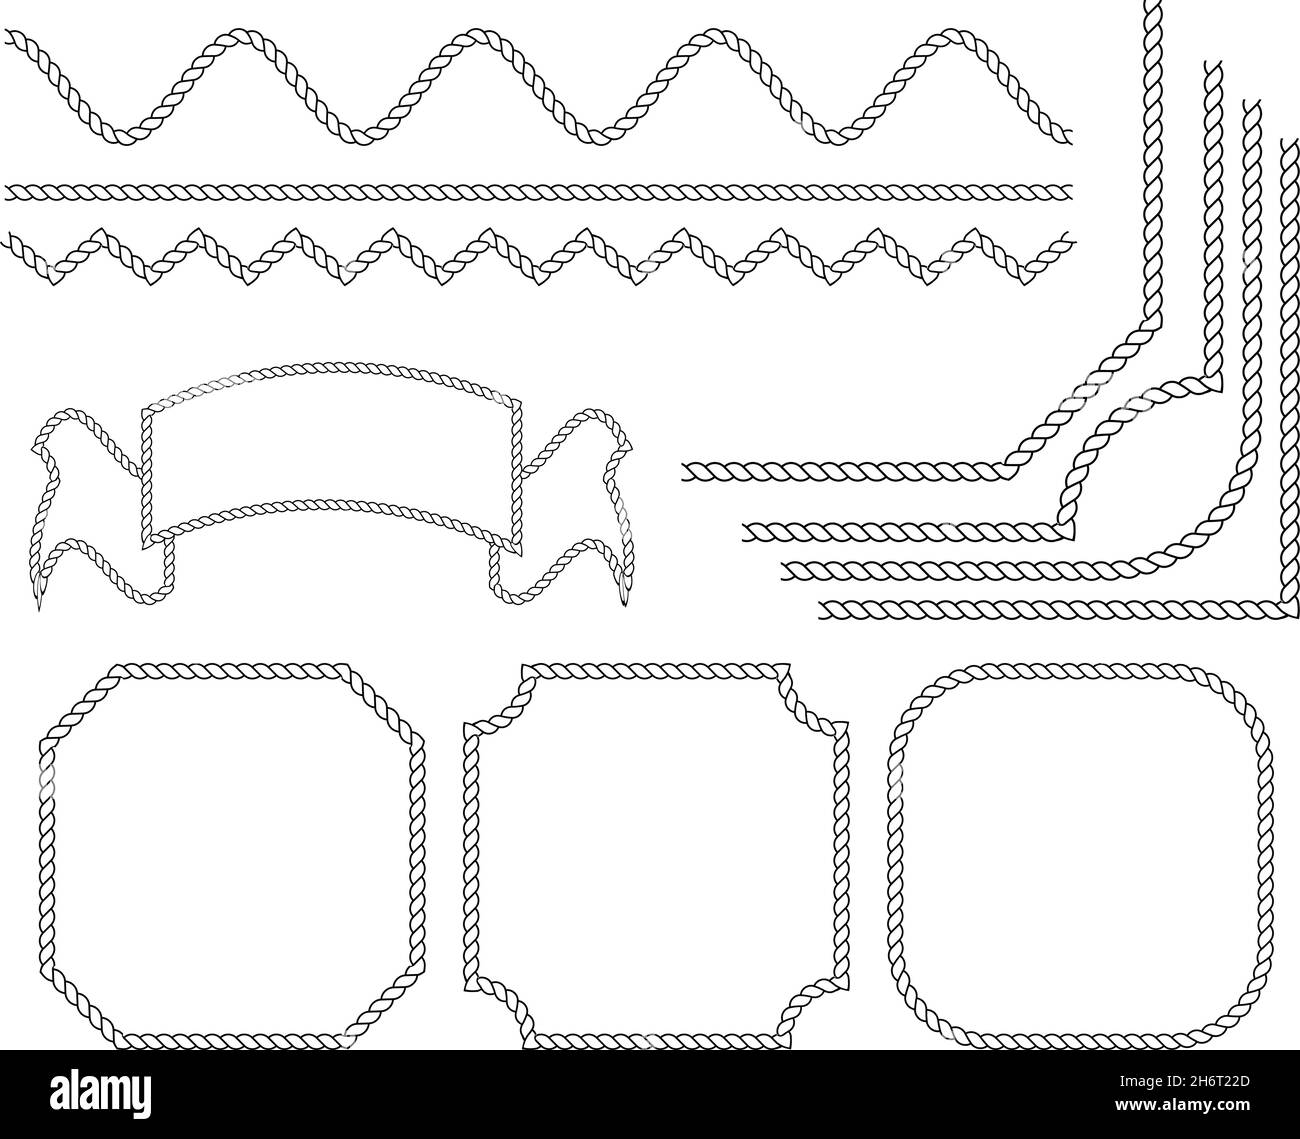 chain line vector set, File contains various chain line shapes, blunt and pointed waves, great for various design materials Stock Vector